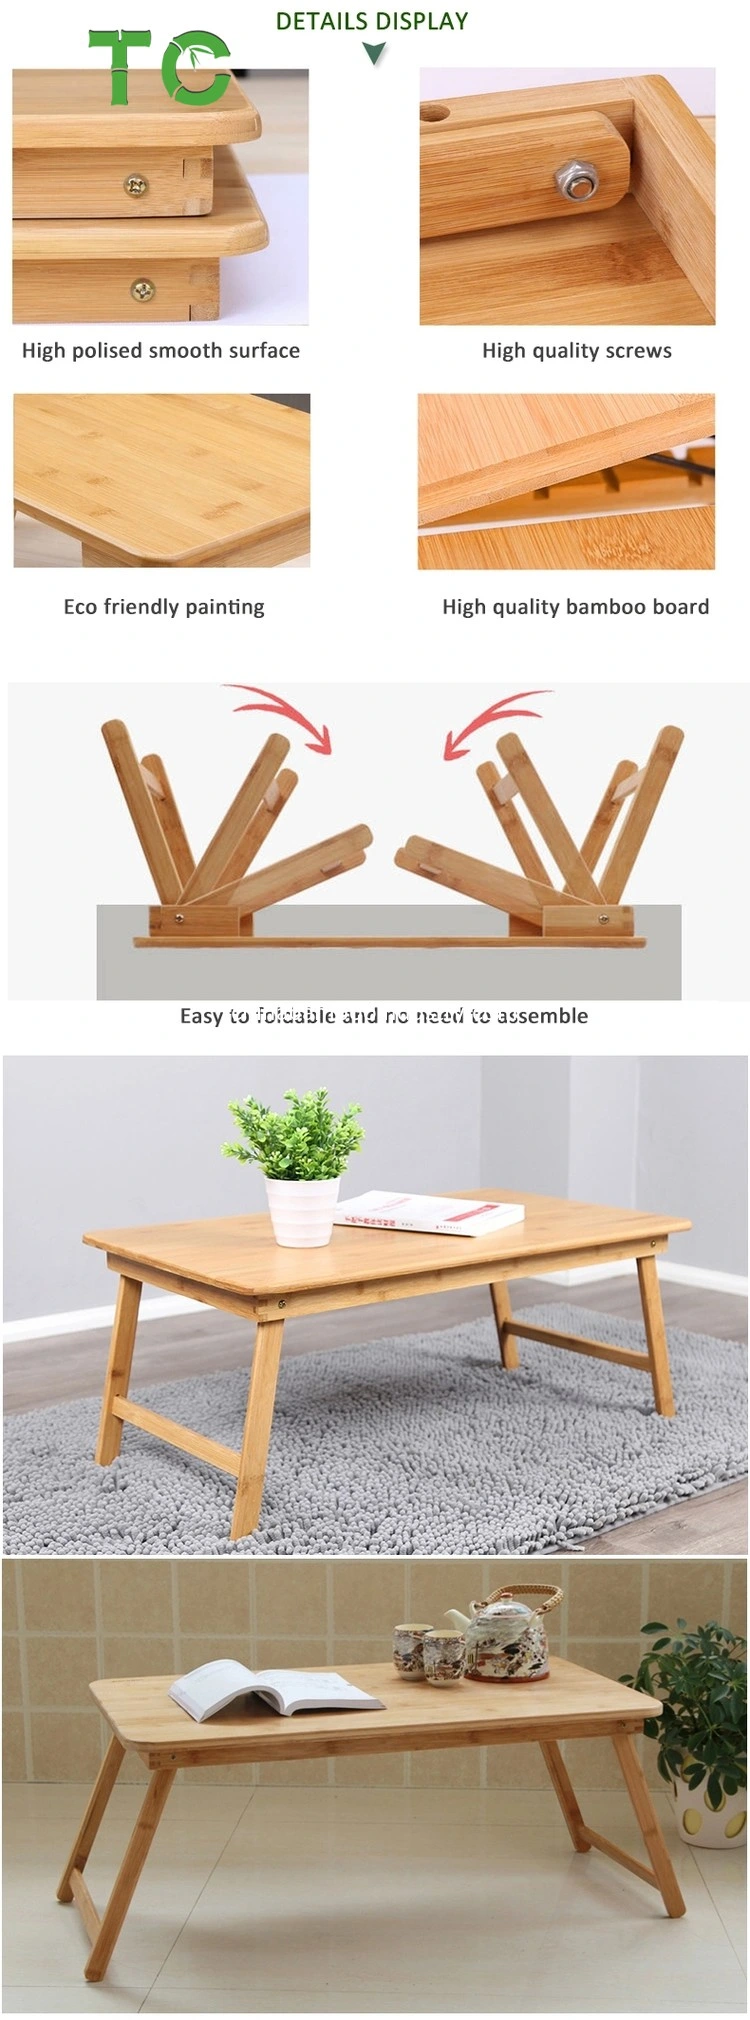 Customized Reliable Quality Folding Sofa Tray Laptop Desk Bamboo Folding Bed Table